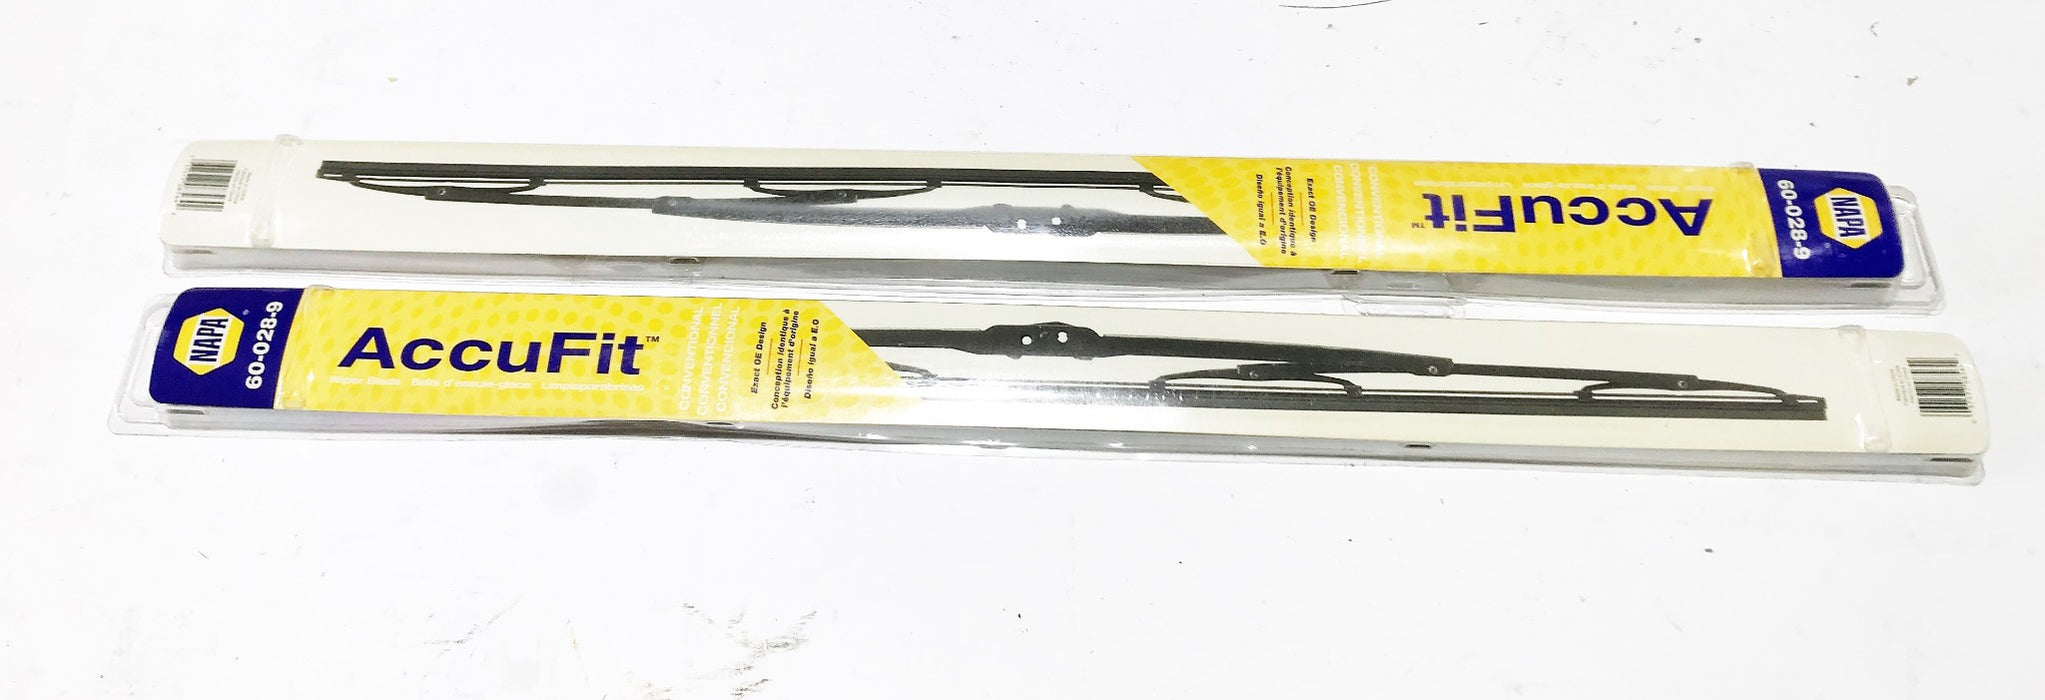 NAPA "AccuFit" Windshield Wiper Blade 60-028-9 [Lot of 2] NOS